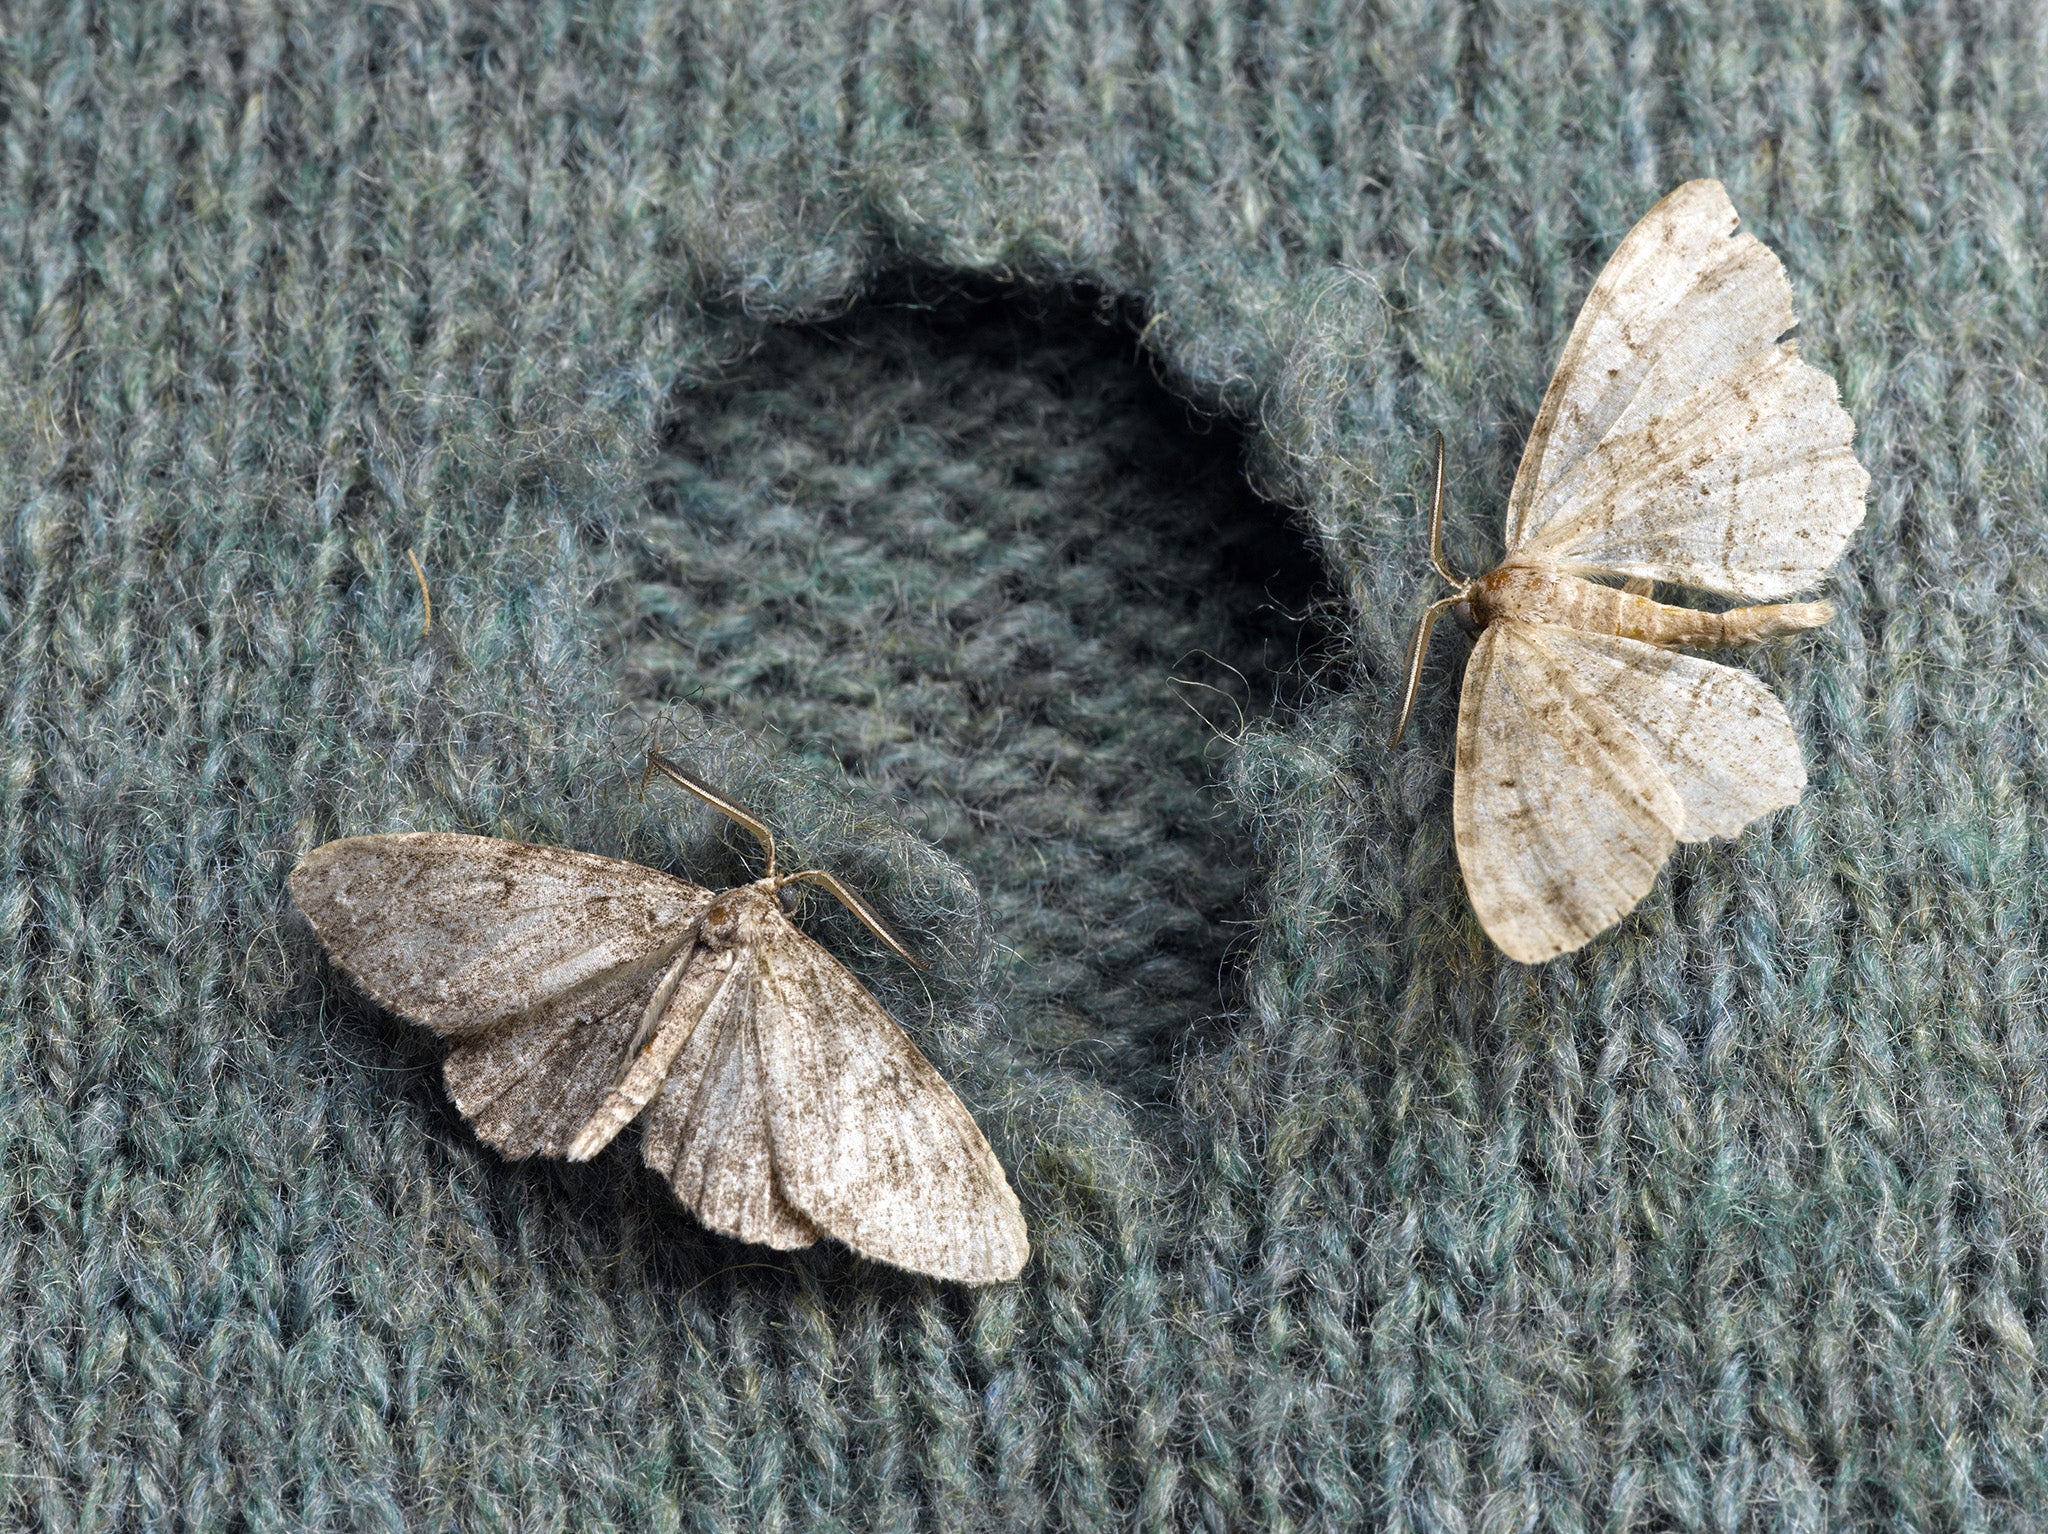 Clothes moths are responsible for a lot of damage in Britain's wardrobes